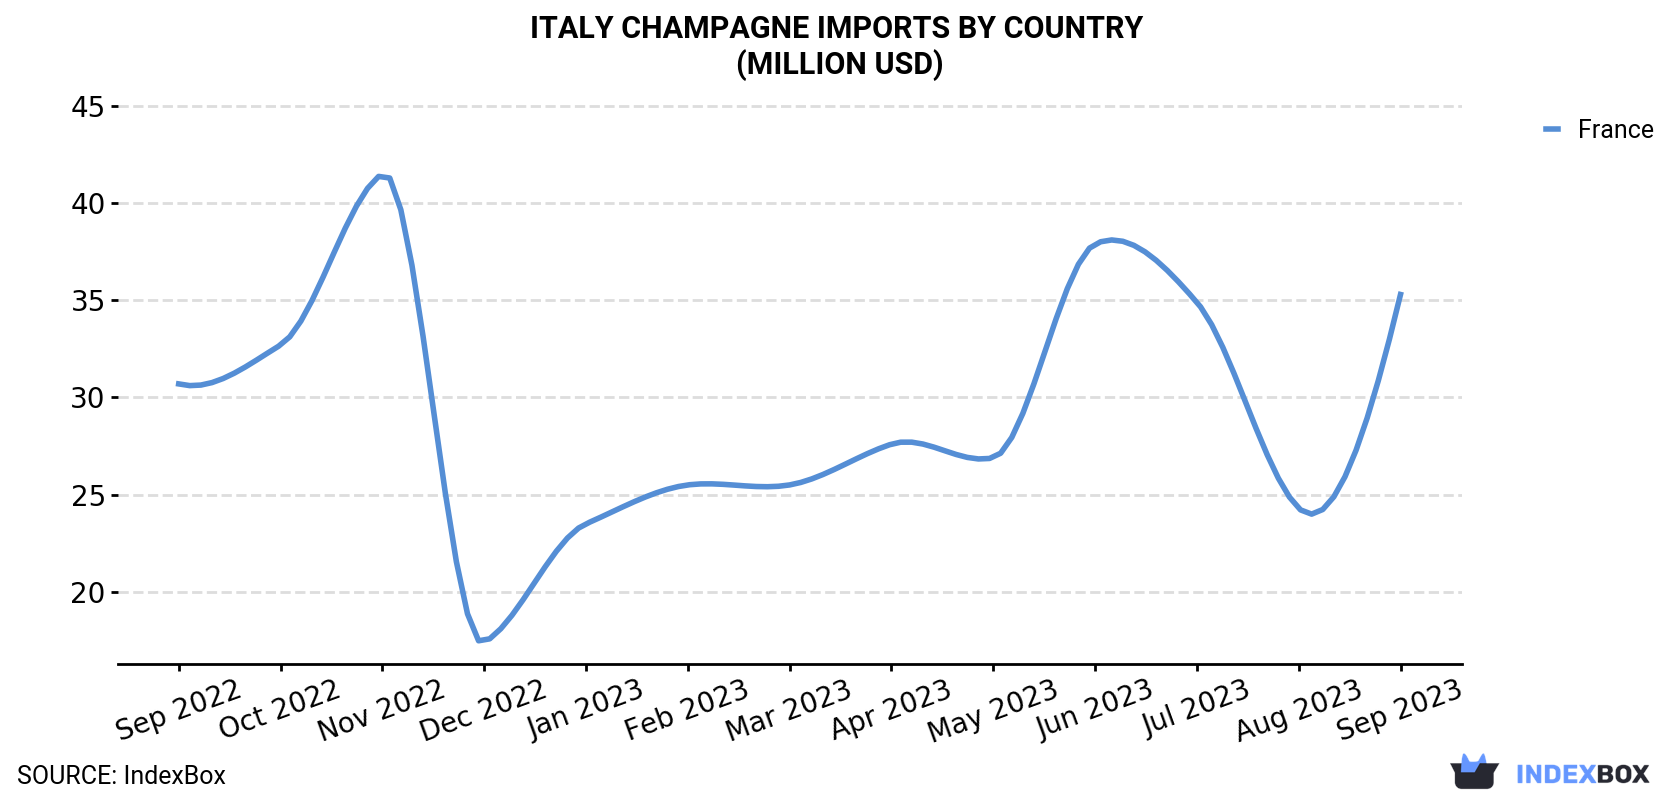 Italy Champagne Imports By Country (Million USD)